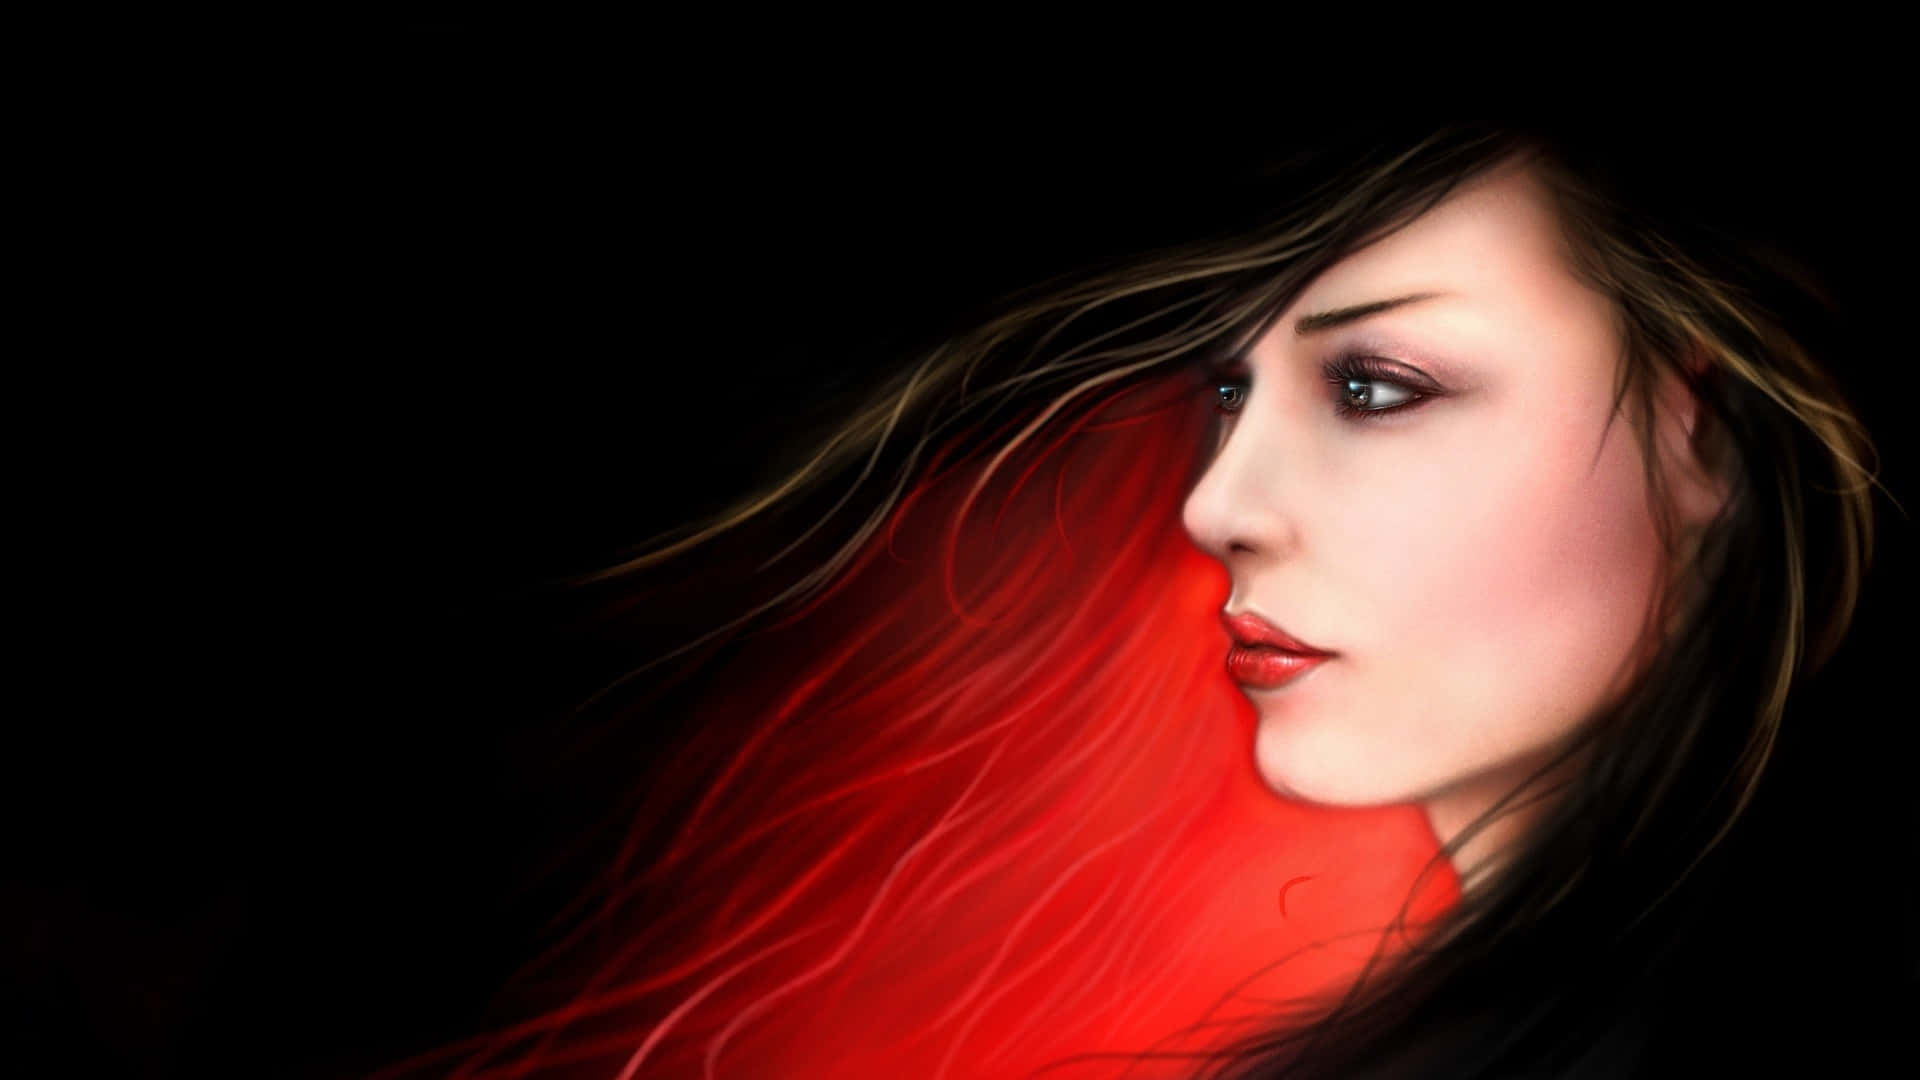 Mysterious Red Haired Woman Background